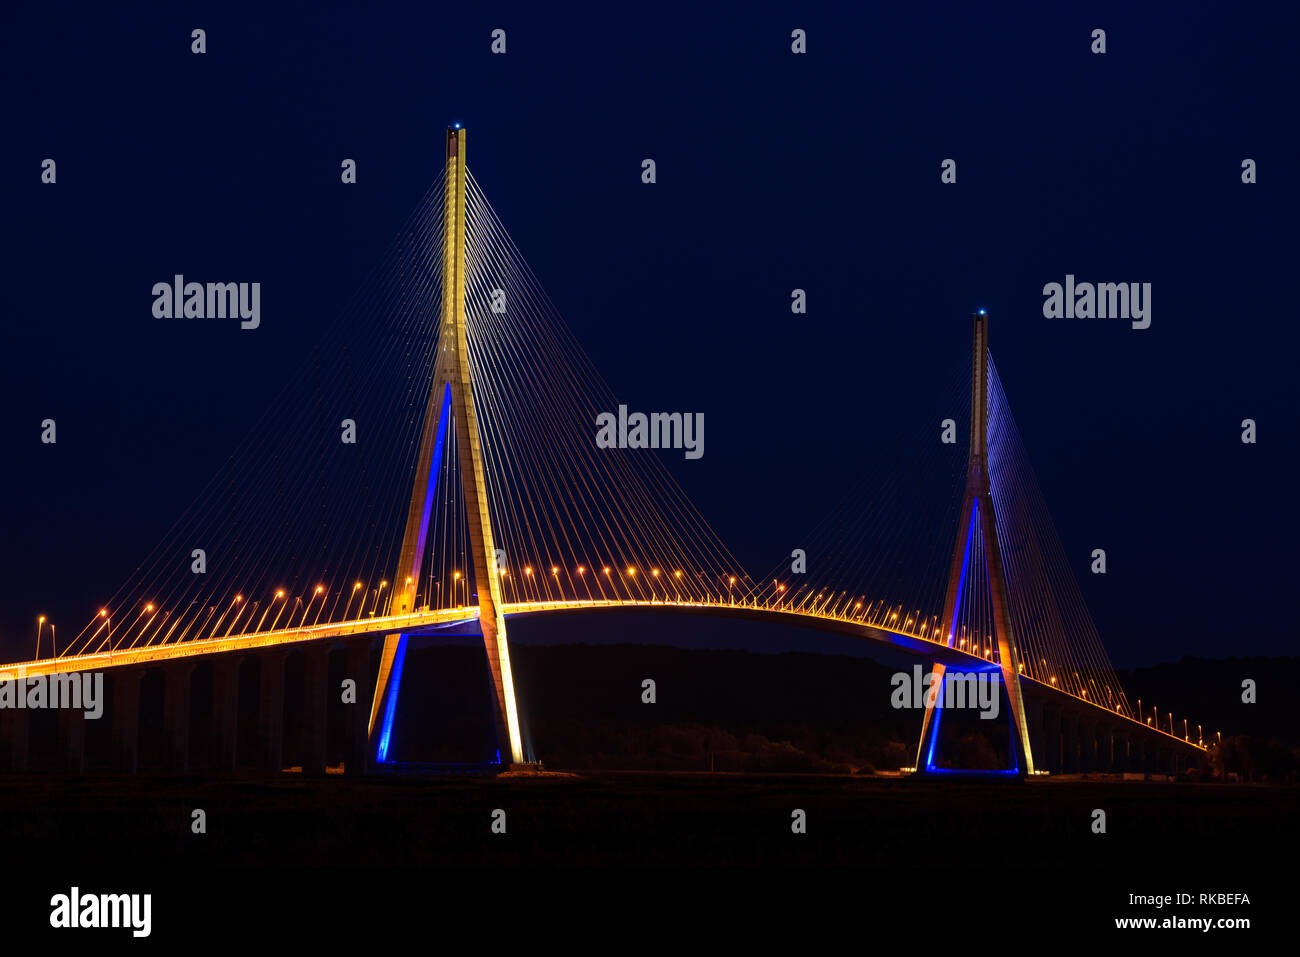 Pont de Normandie Bridge in Normandy, France at night. It links the cities of Le Havre and Honfleur and crosses the Seine river. Stock Photo